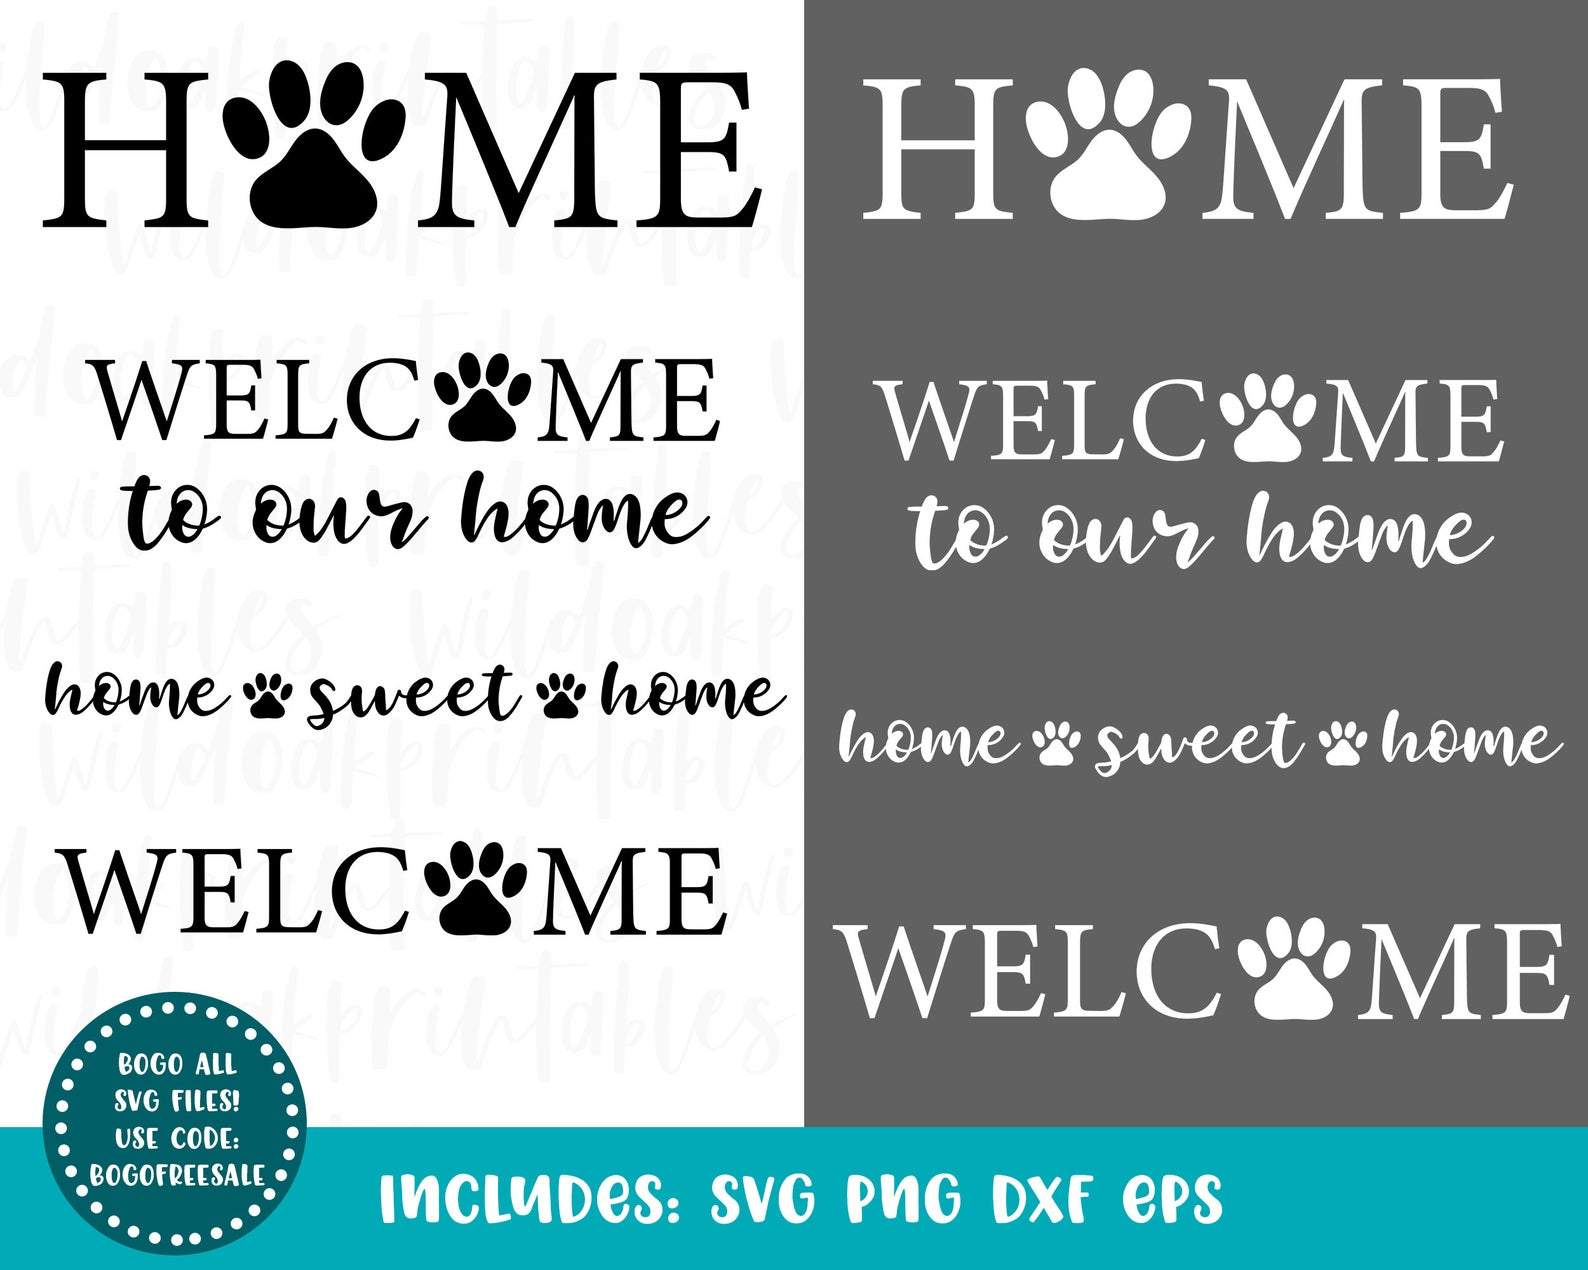 Download Digital Welcome Home Dog Signs Svg Dog Home Signs Home Sweet Home Paw Print Signs Svg Welcome To Our Home Paw Print Cat Home Signs Svg Frame Not Included So Fontsy